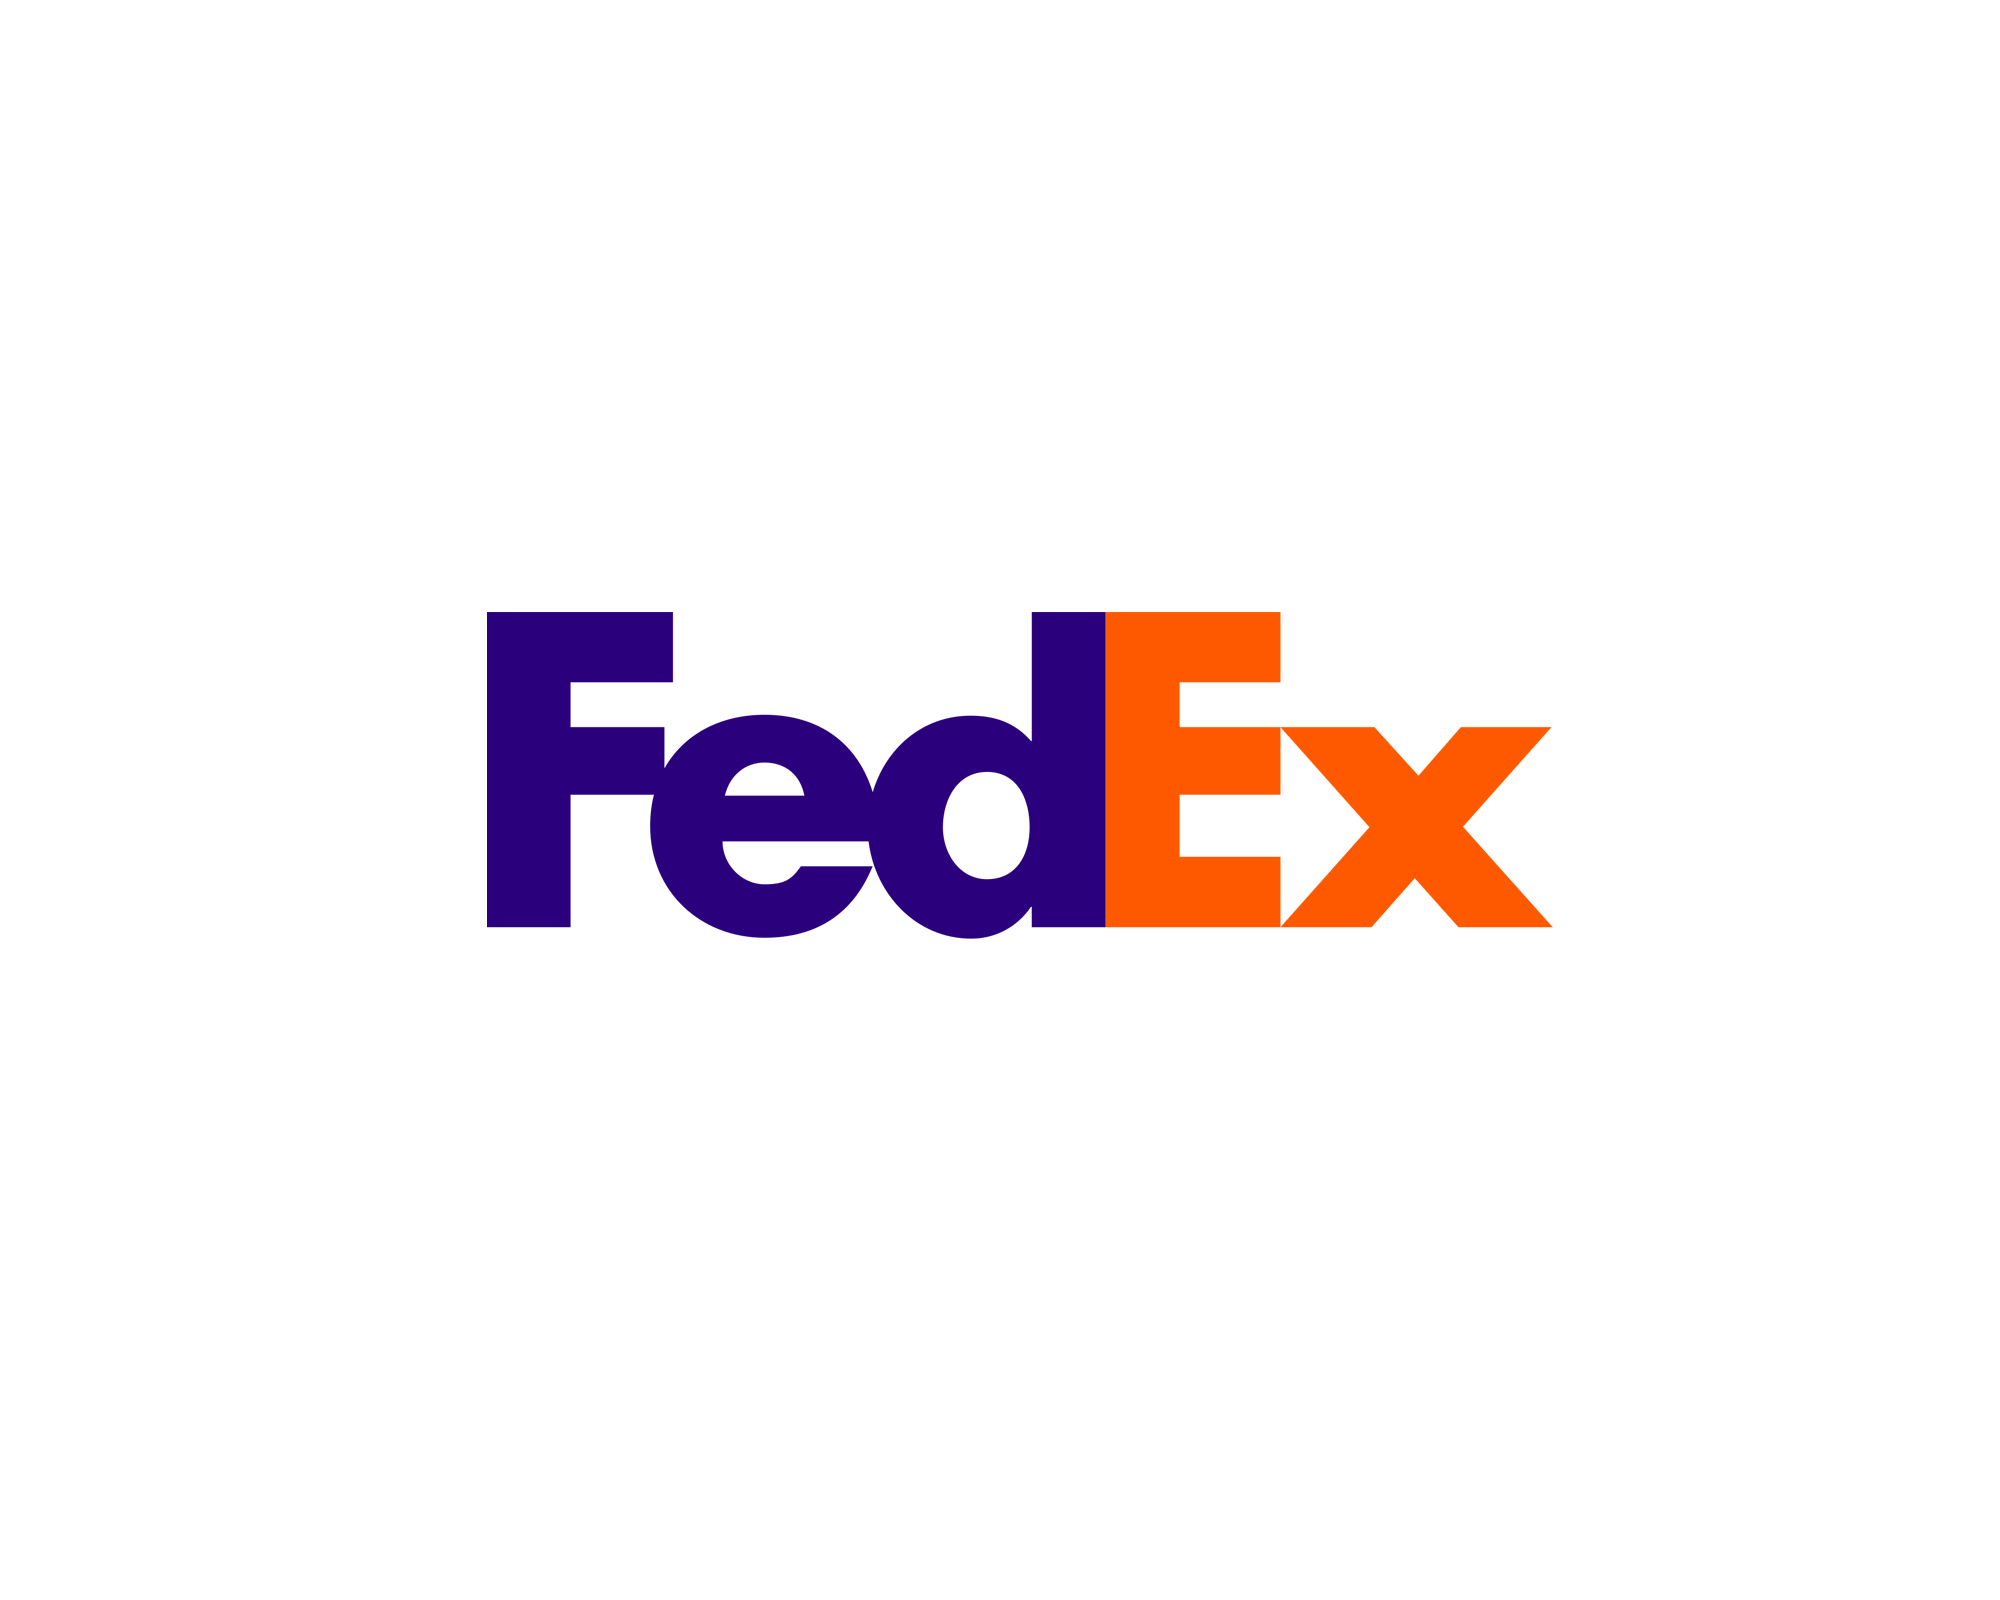 White FedEx Logo - The FedEx logo is a very subtle example of negative space in logo